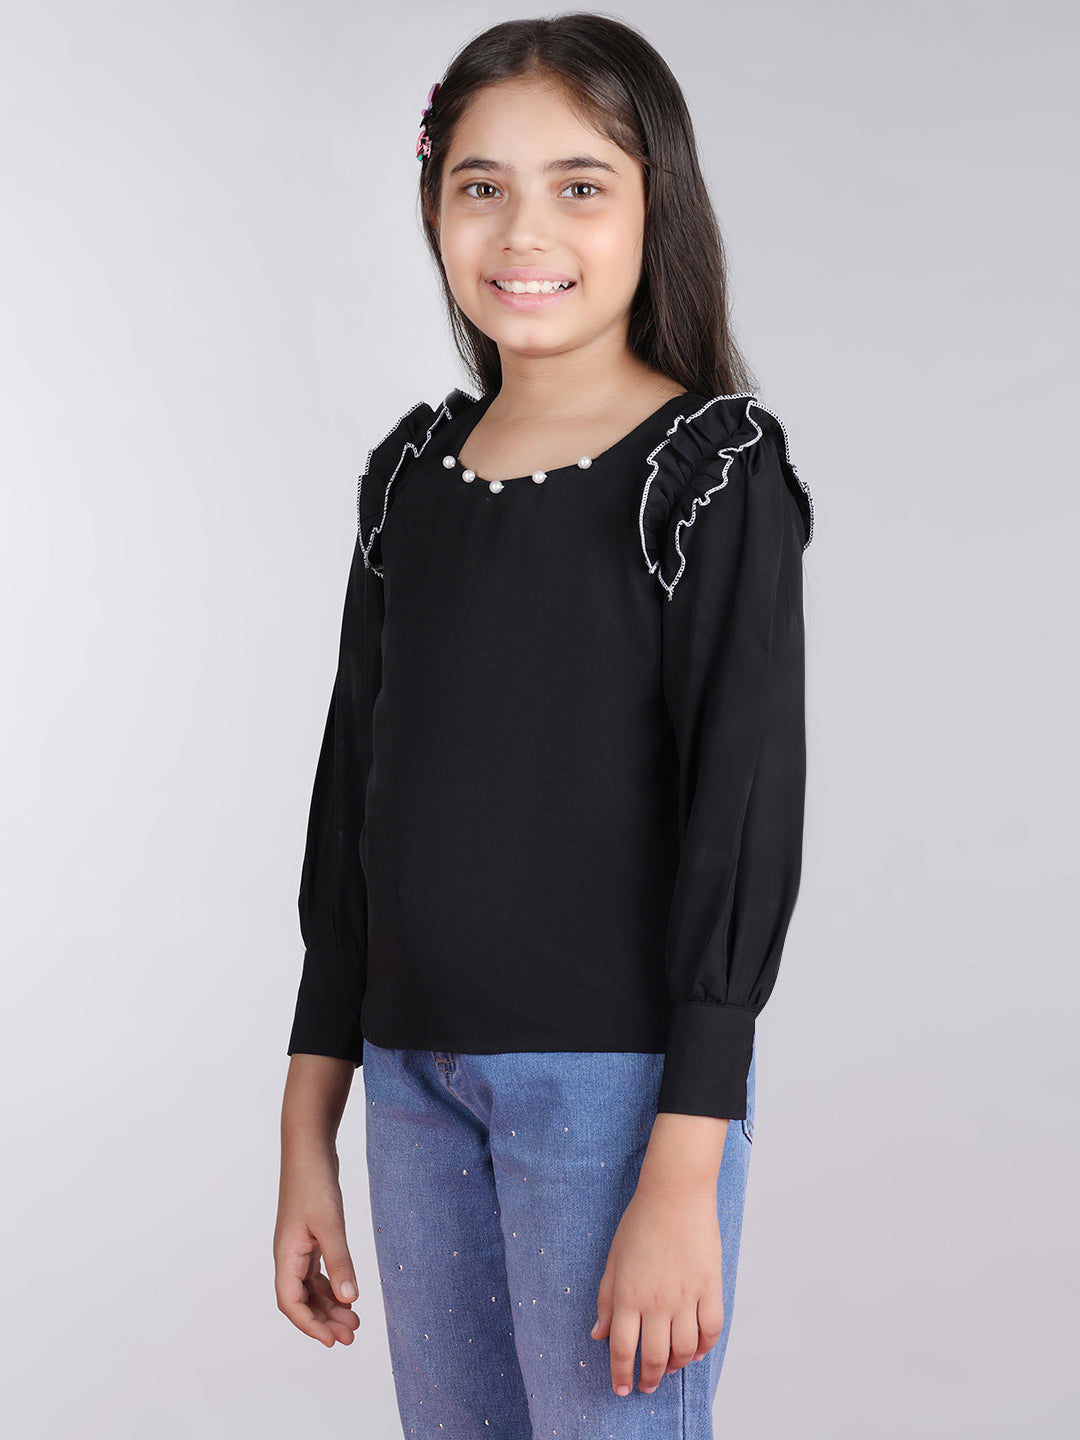 Cutiekins Solid Full Sleeves Polyester Tops-Black & White